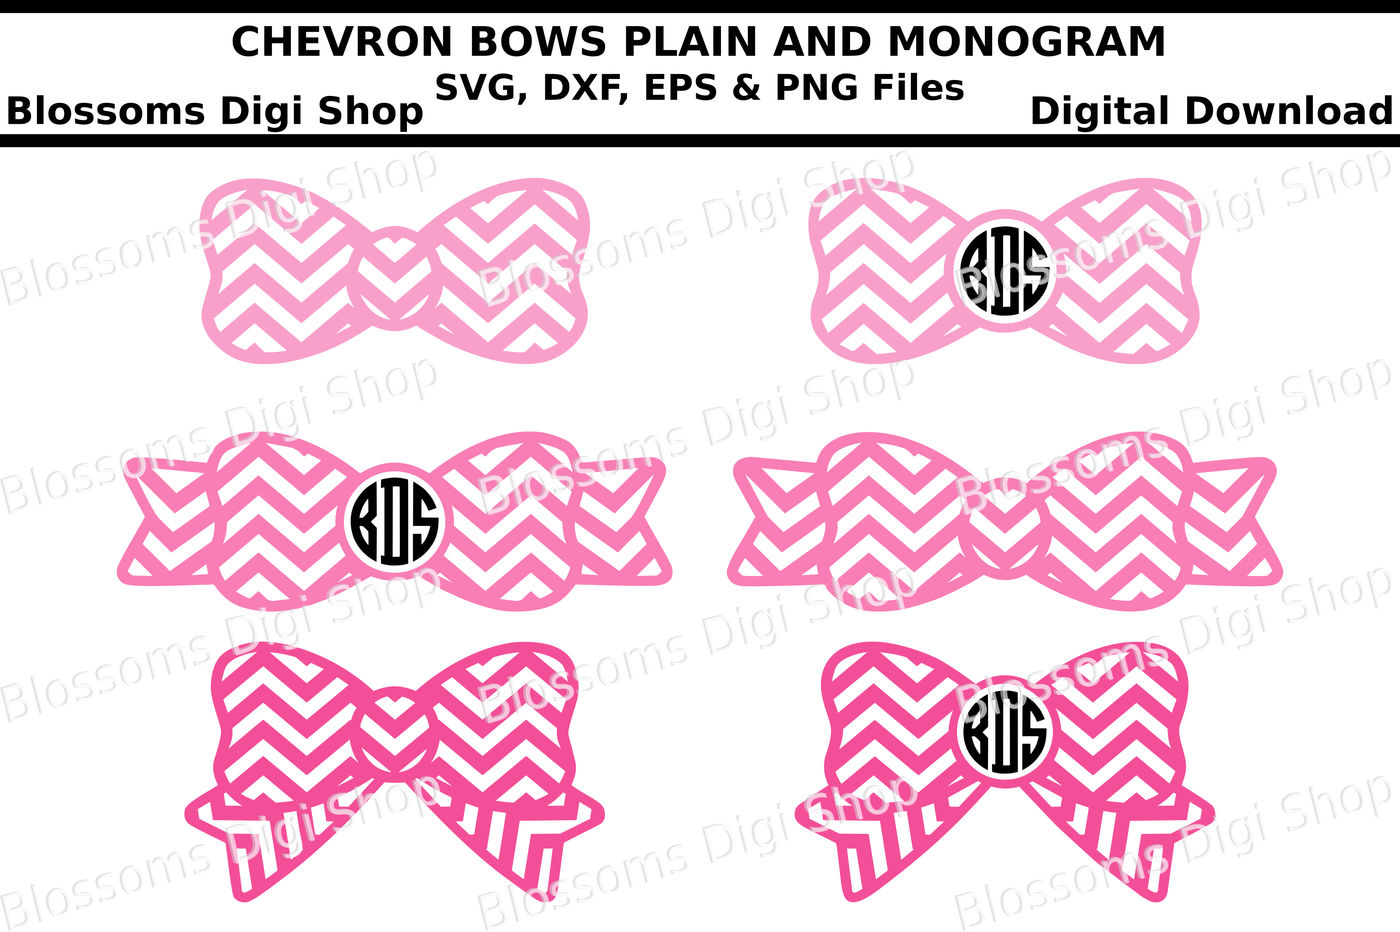 Download Chevron Bow Monogram Svg Eps Dxf And Png Cut Files By Blossoms Digi Shop Thehungryjpeg Com